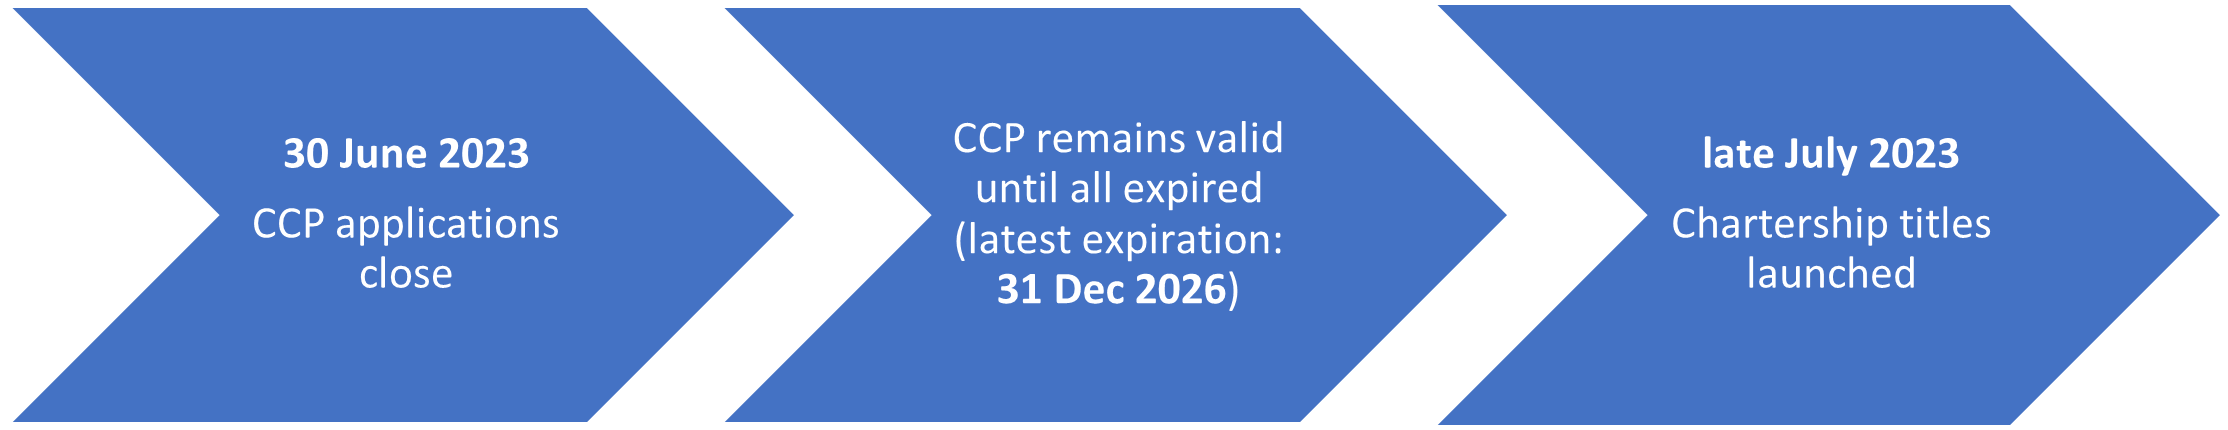 diagram shows the CCP applications close on 30 June 2023, CCP remains valid until all expired by 31 December 2026, UKCSC Chartership titles launched July 2023